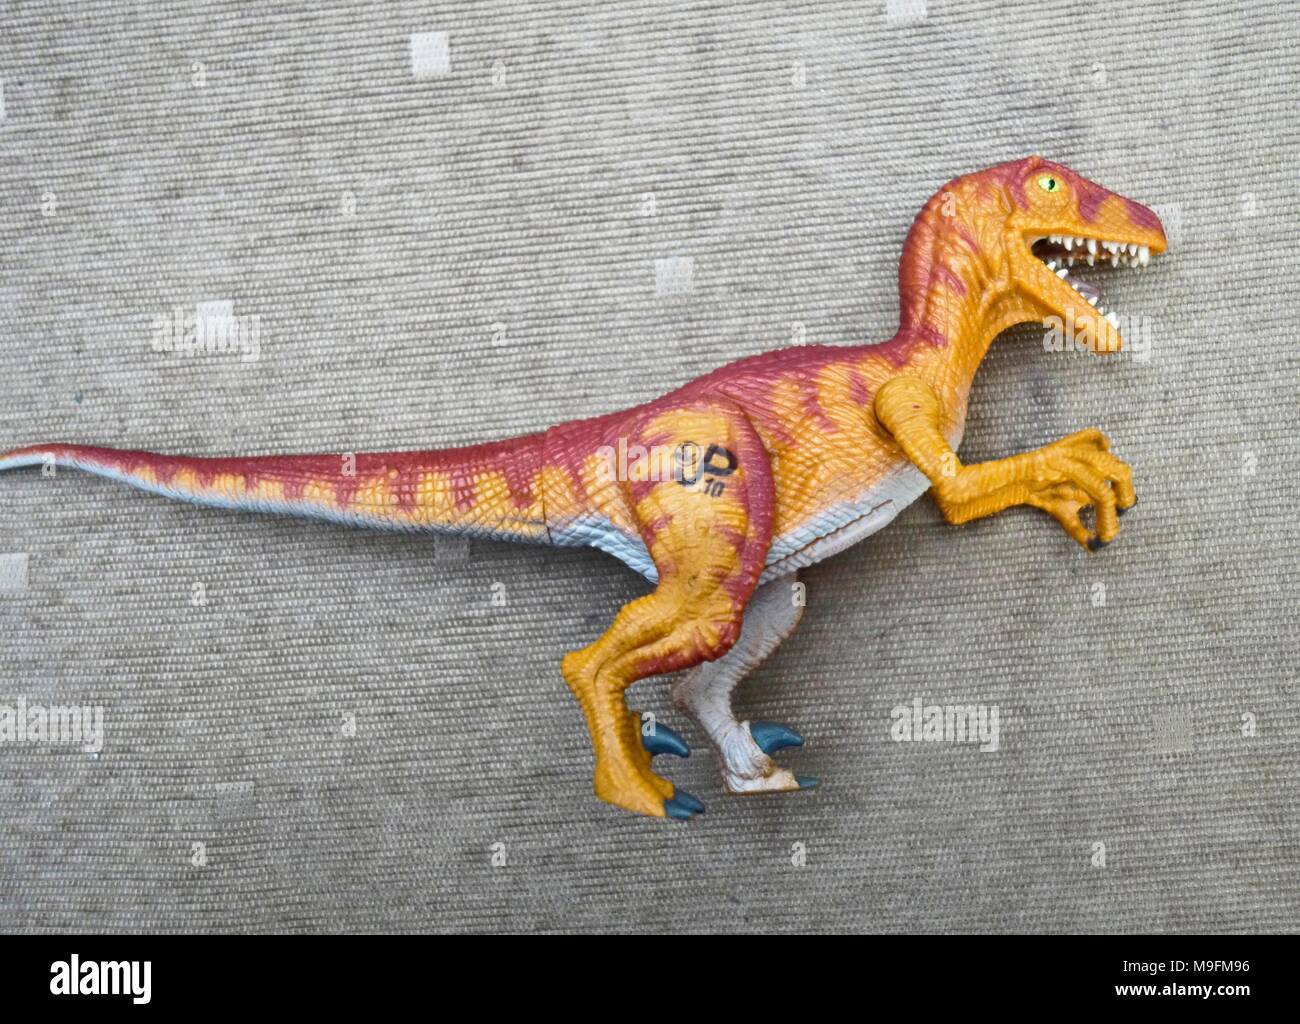 Jurassic Park action figure from Kenner Stock Photo - Alamy